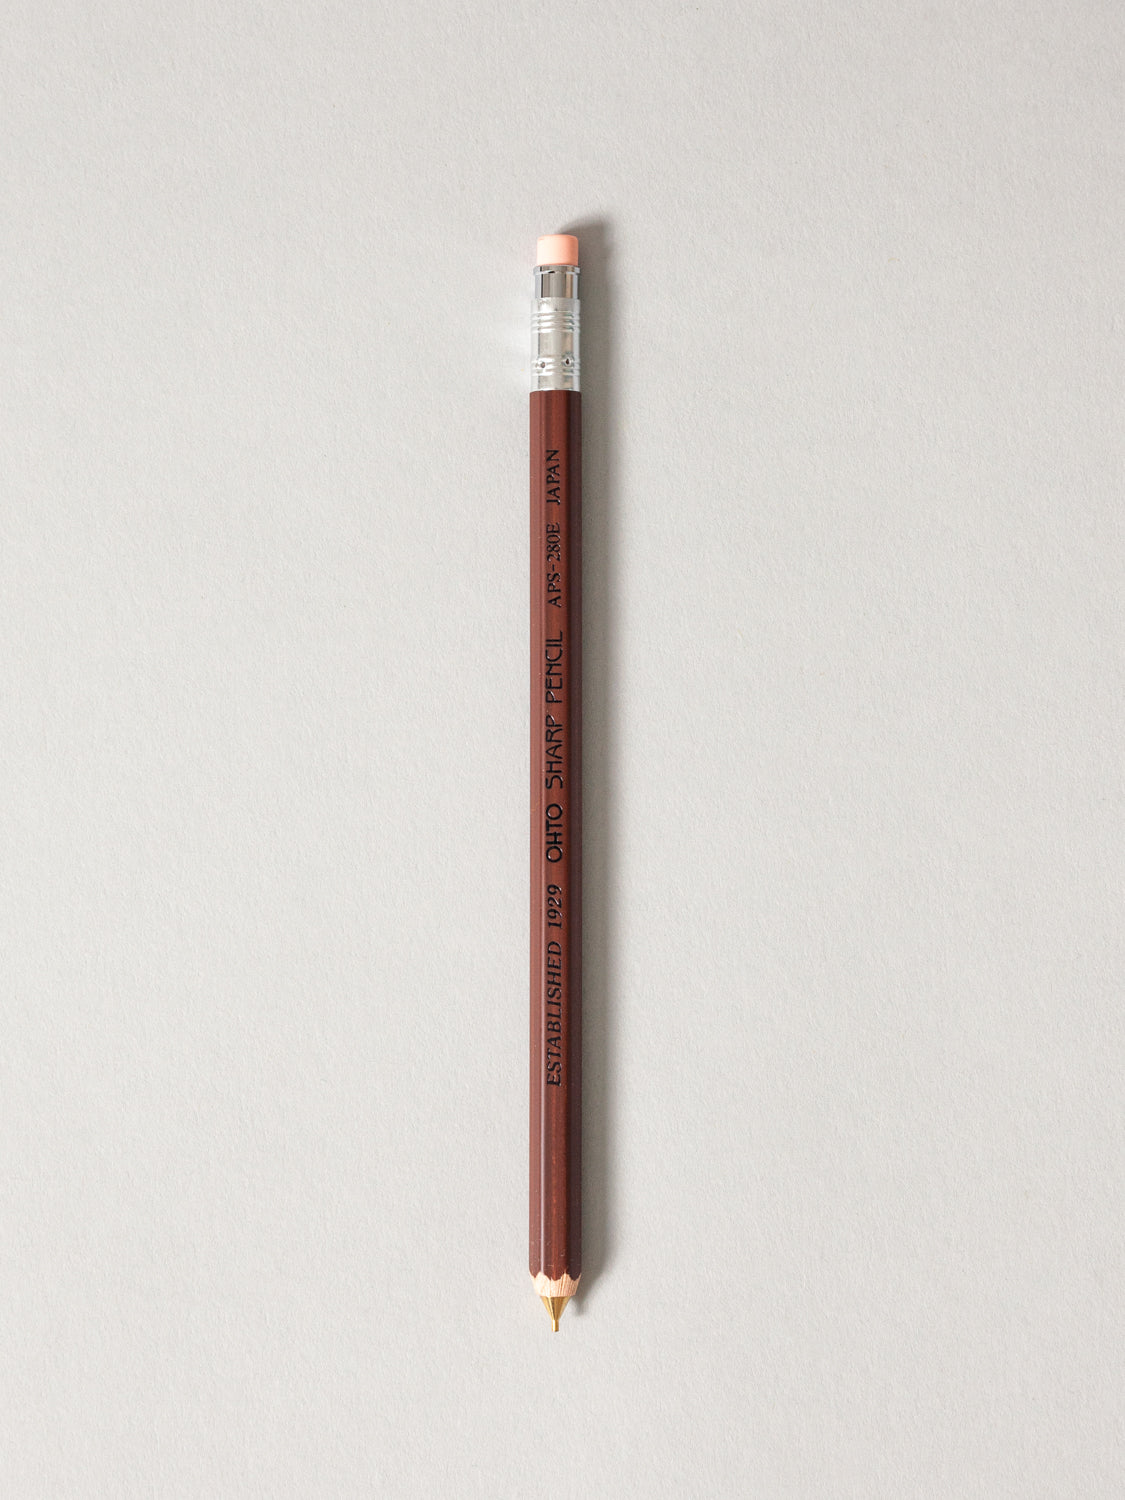 OHTO 0.5mm Wooden Mechanical Pencil